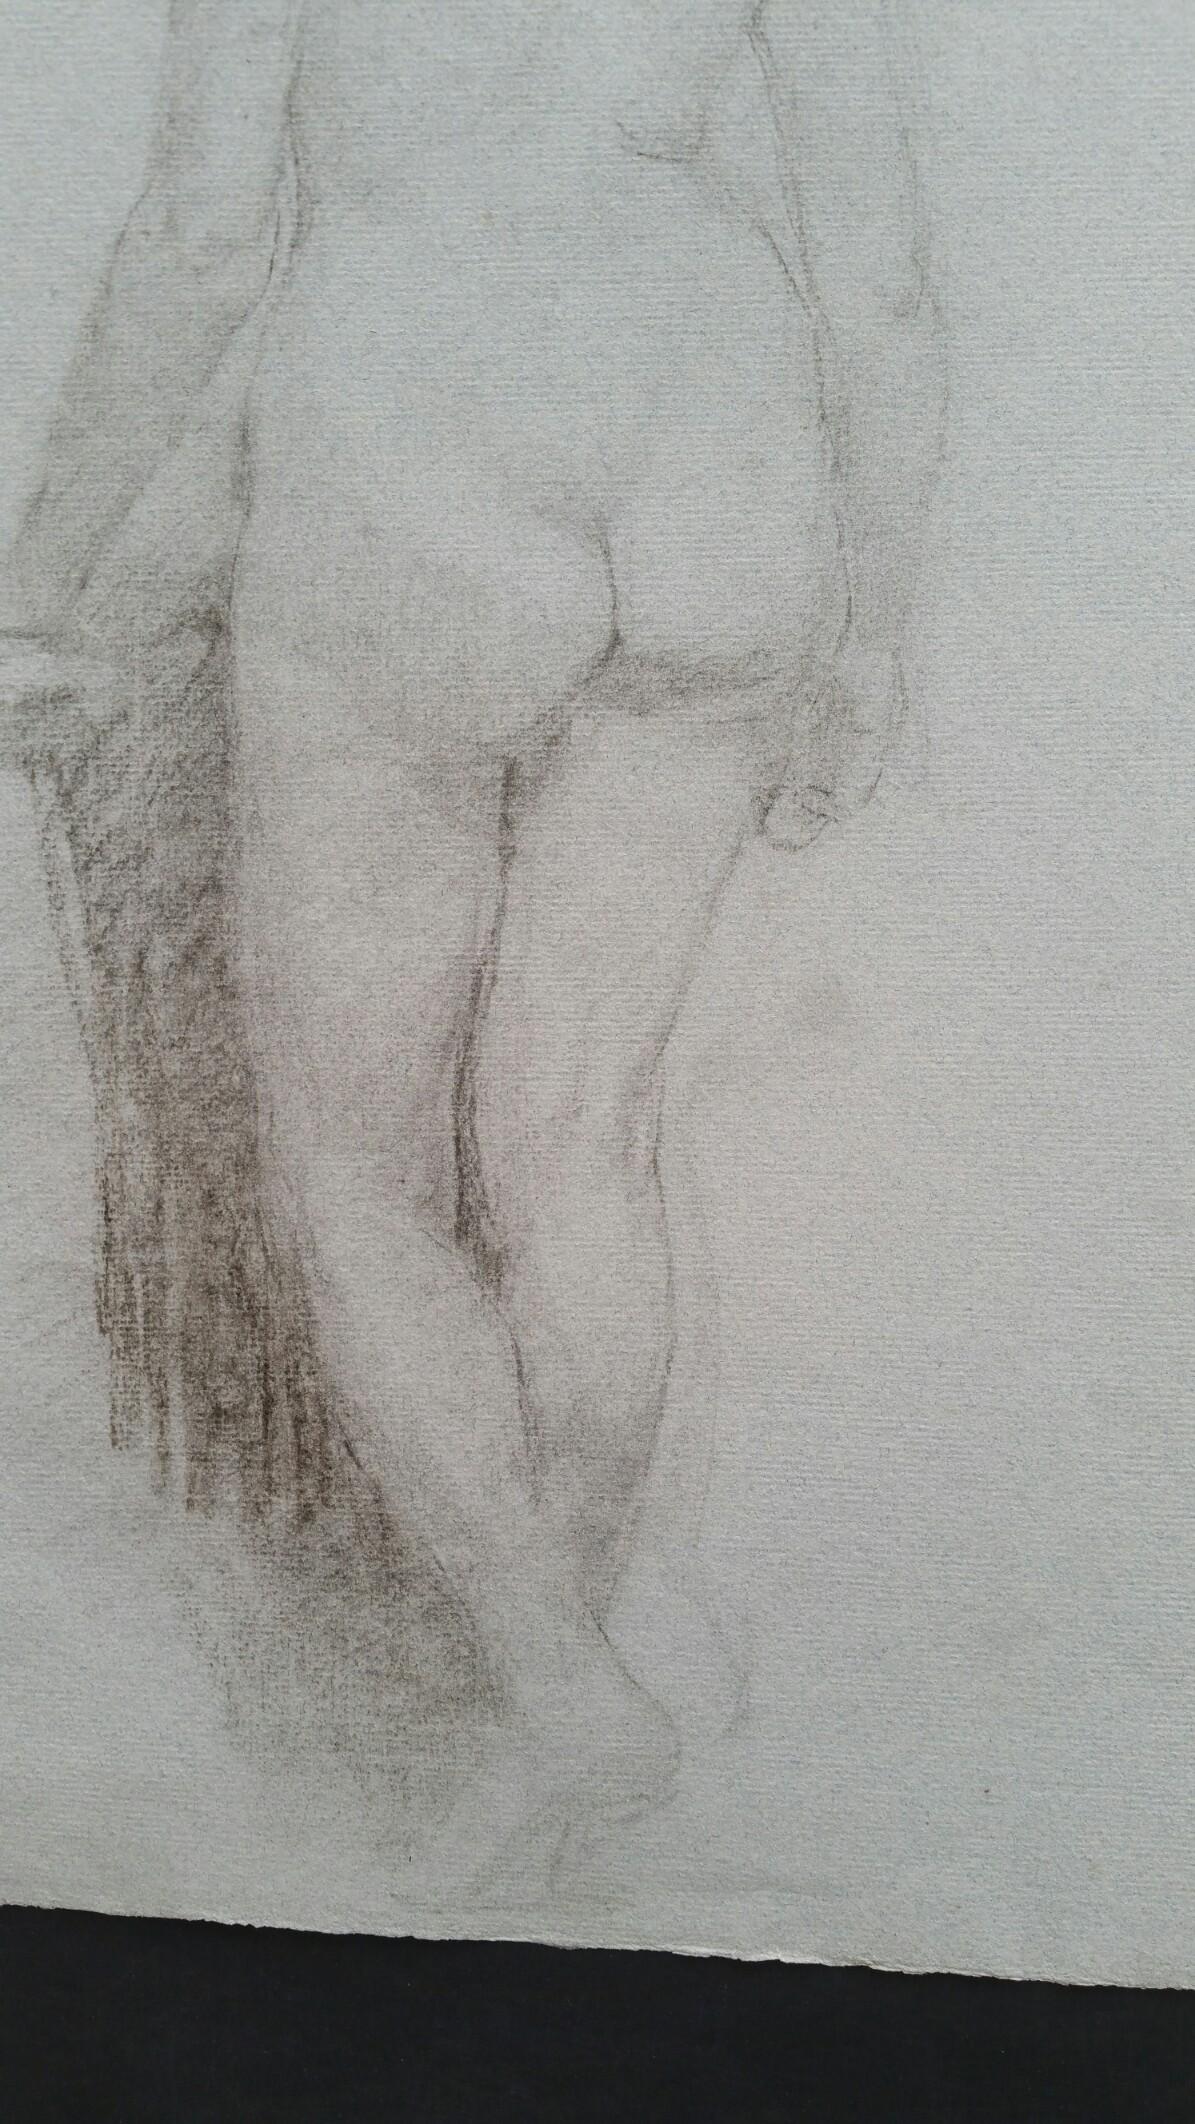 English Graphite Sketch of a Female Nude, Back View
by Henry George Moon (British 1857-1905)
on pale blue/grey artists paper, unframed
measurements: sheet 18.5 x 11 inches (width measured at narrowest point of sheet based on fold to the